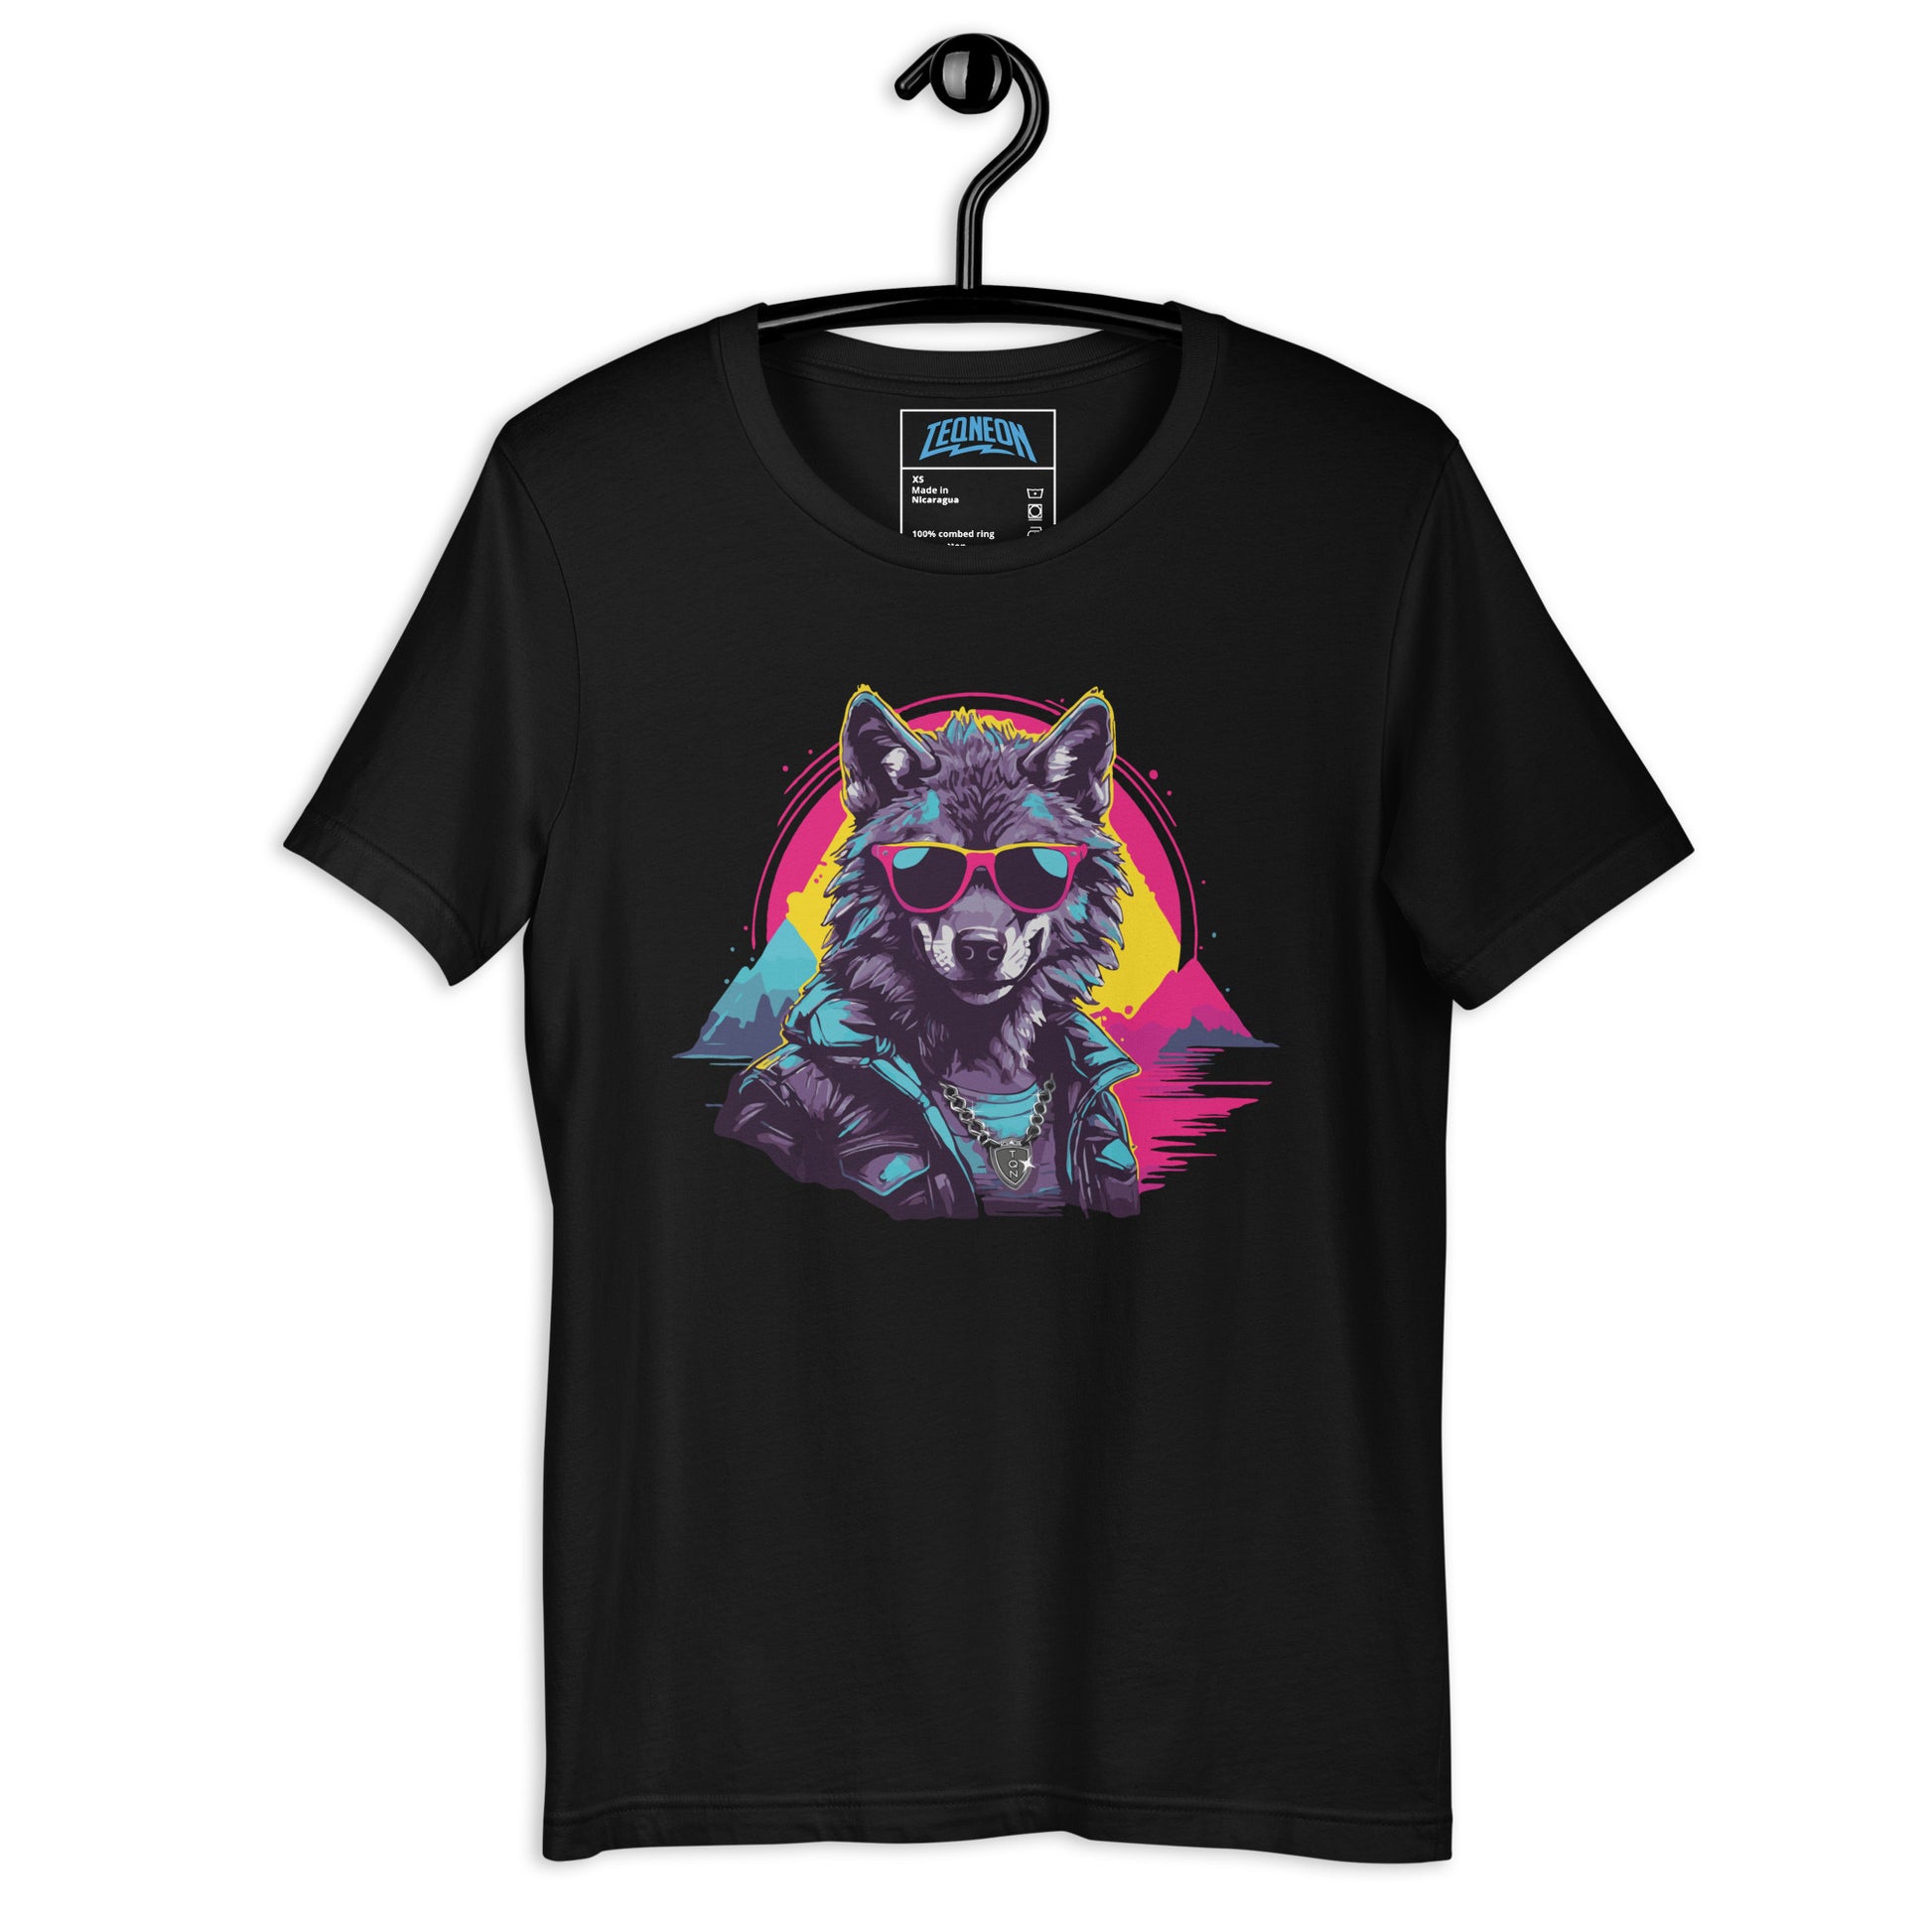 Black T-shirt featuring a funny, pimp-styled wolf wearing sunglasses and a shiny silver chain from the HA HA LAND collection. The HOWLIN' HIPSTER design showcases a hipster wolf with cool accessories, perfect for a unique and humorous fashion statement.